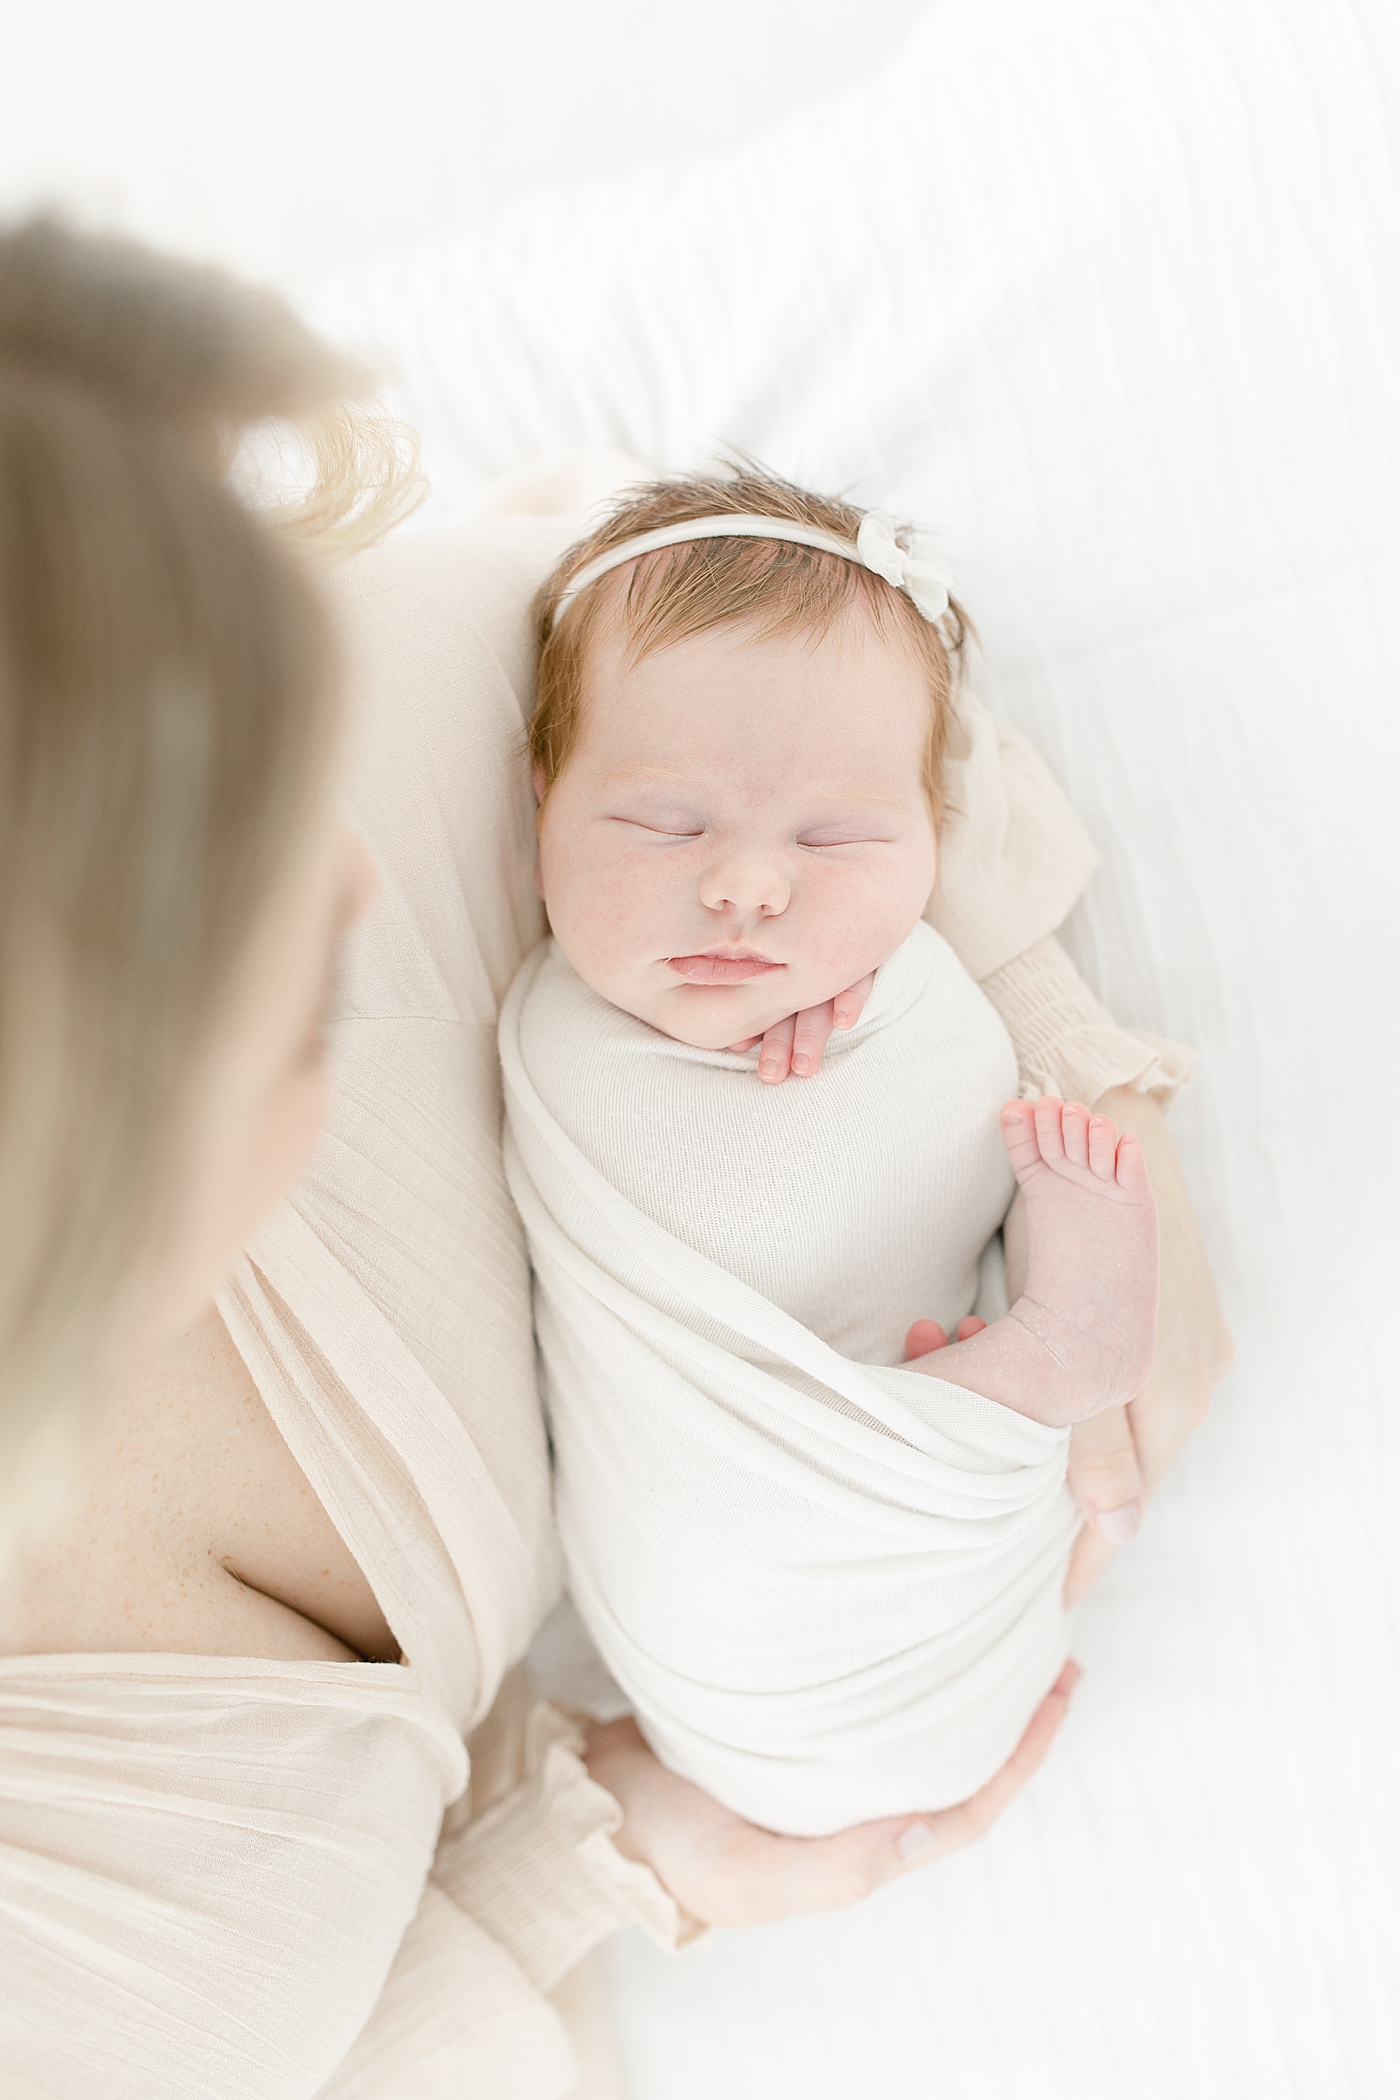 Baby girl swaddled in white wrap | Photo by Little Sunshine Photography